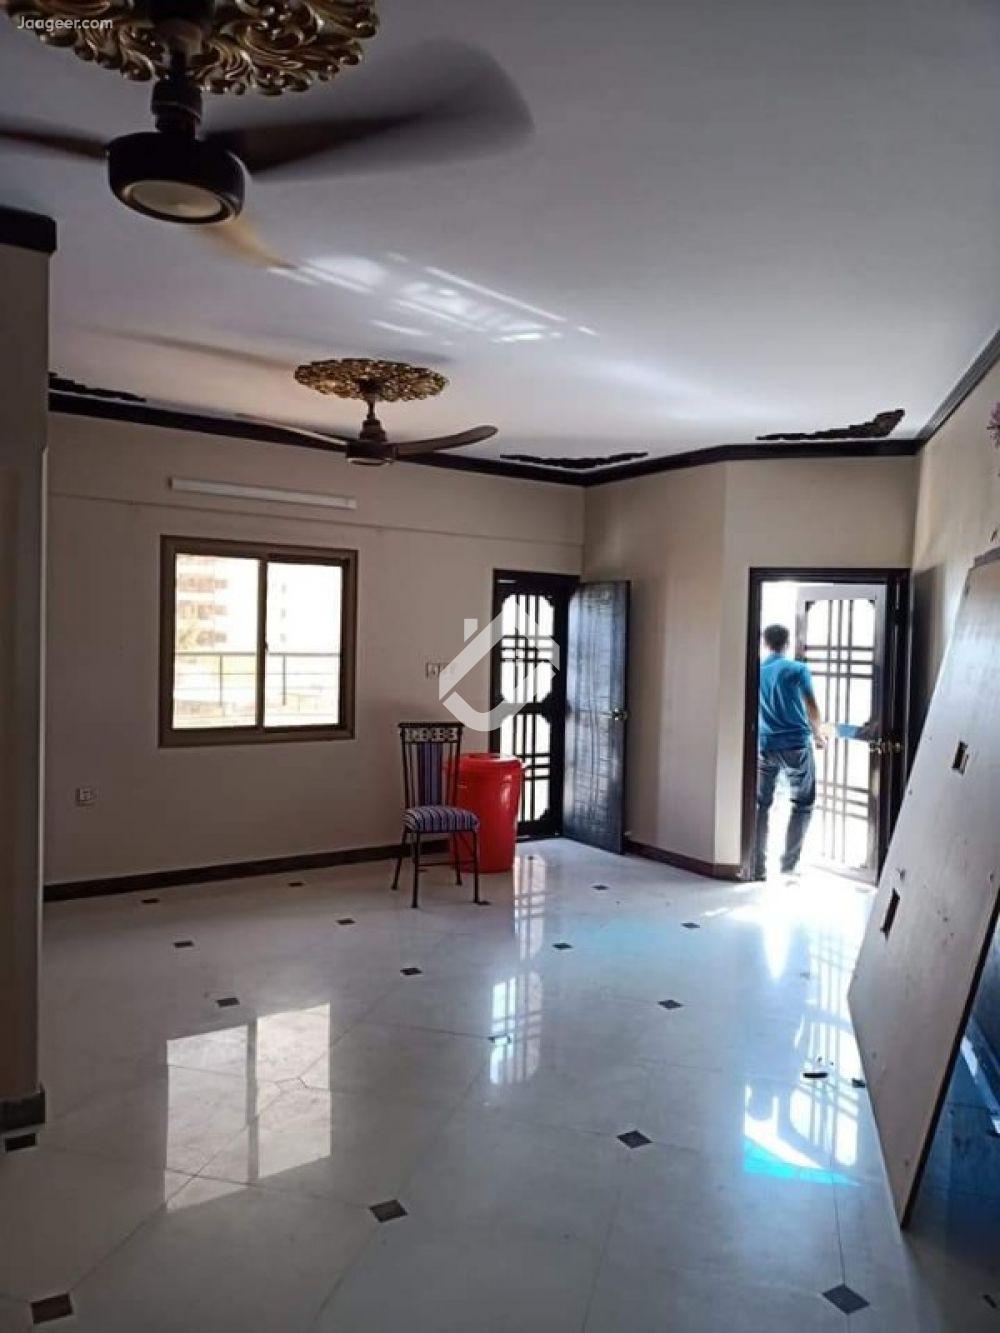 View  3 Bed Apartment Is For Sale In Sharifabad  in Sharifabad , Karachi